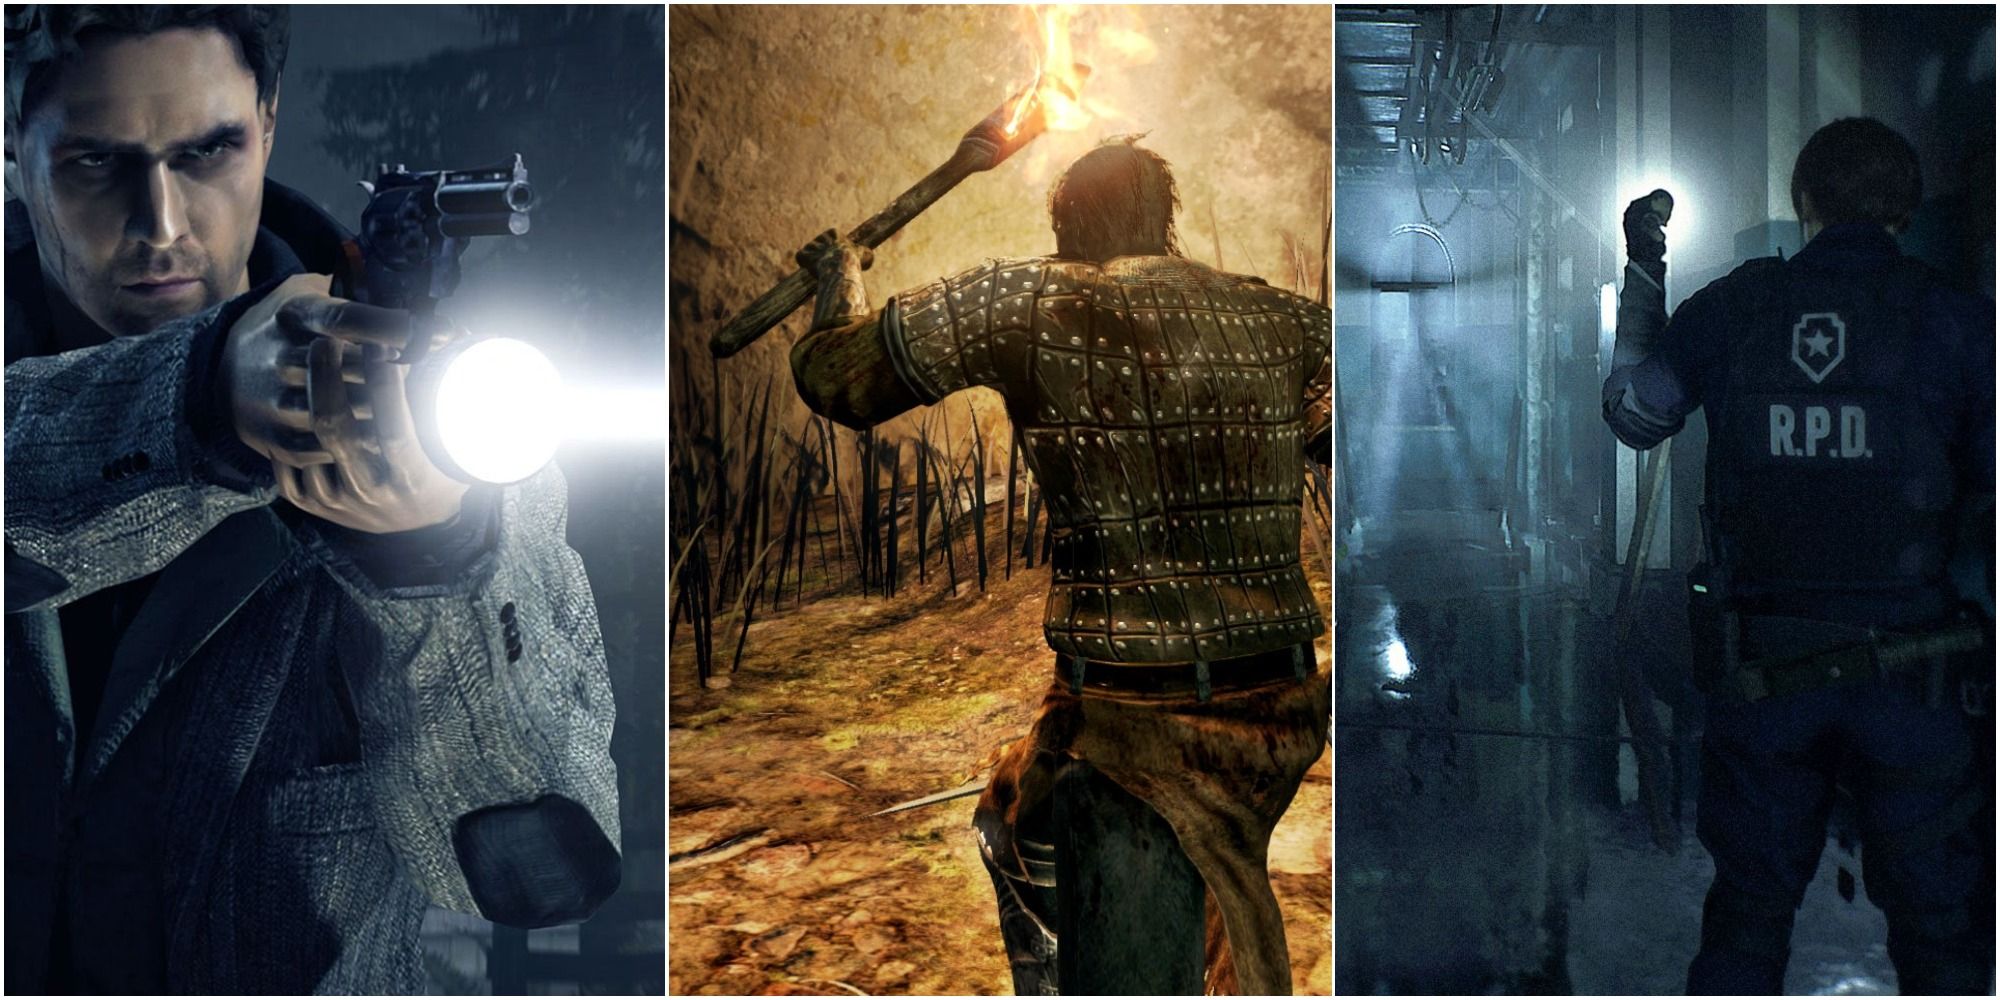 Alan Wake pointing a gun and flashlight, a dark souls 2 character with a torch, and Leon Kennedy shining a flashlight down a hallway, left to right